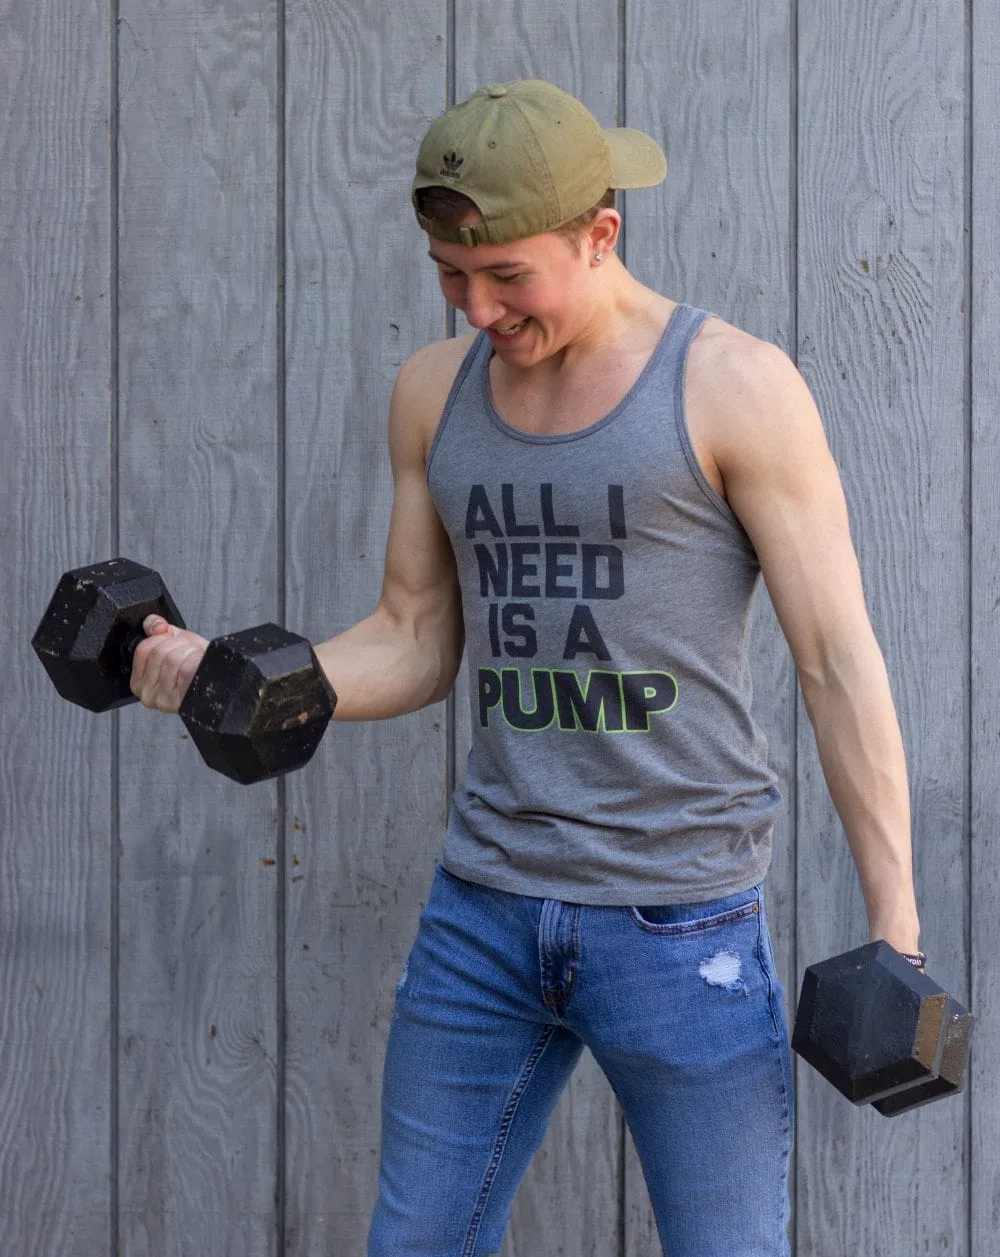 Teen lifting weights in a "all i need is a pump" tank top. 